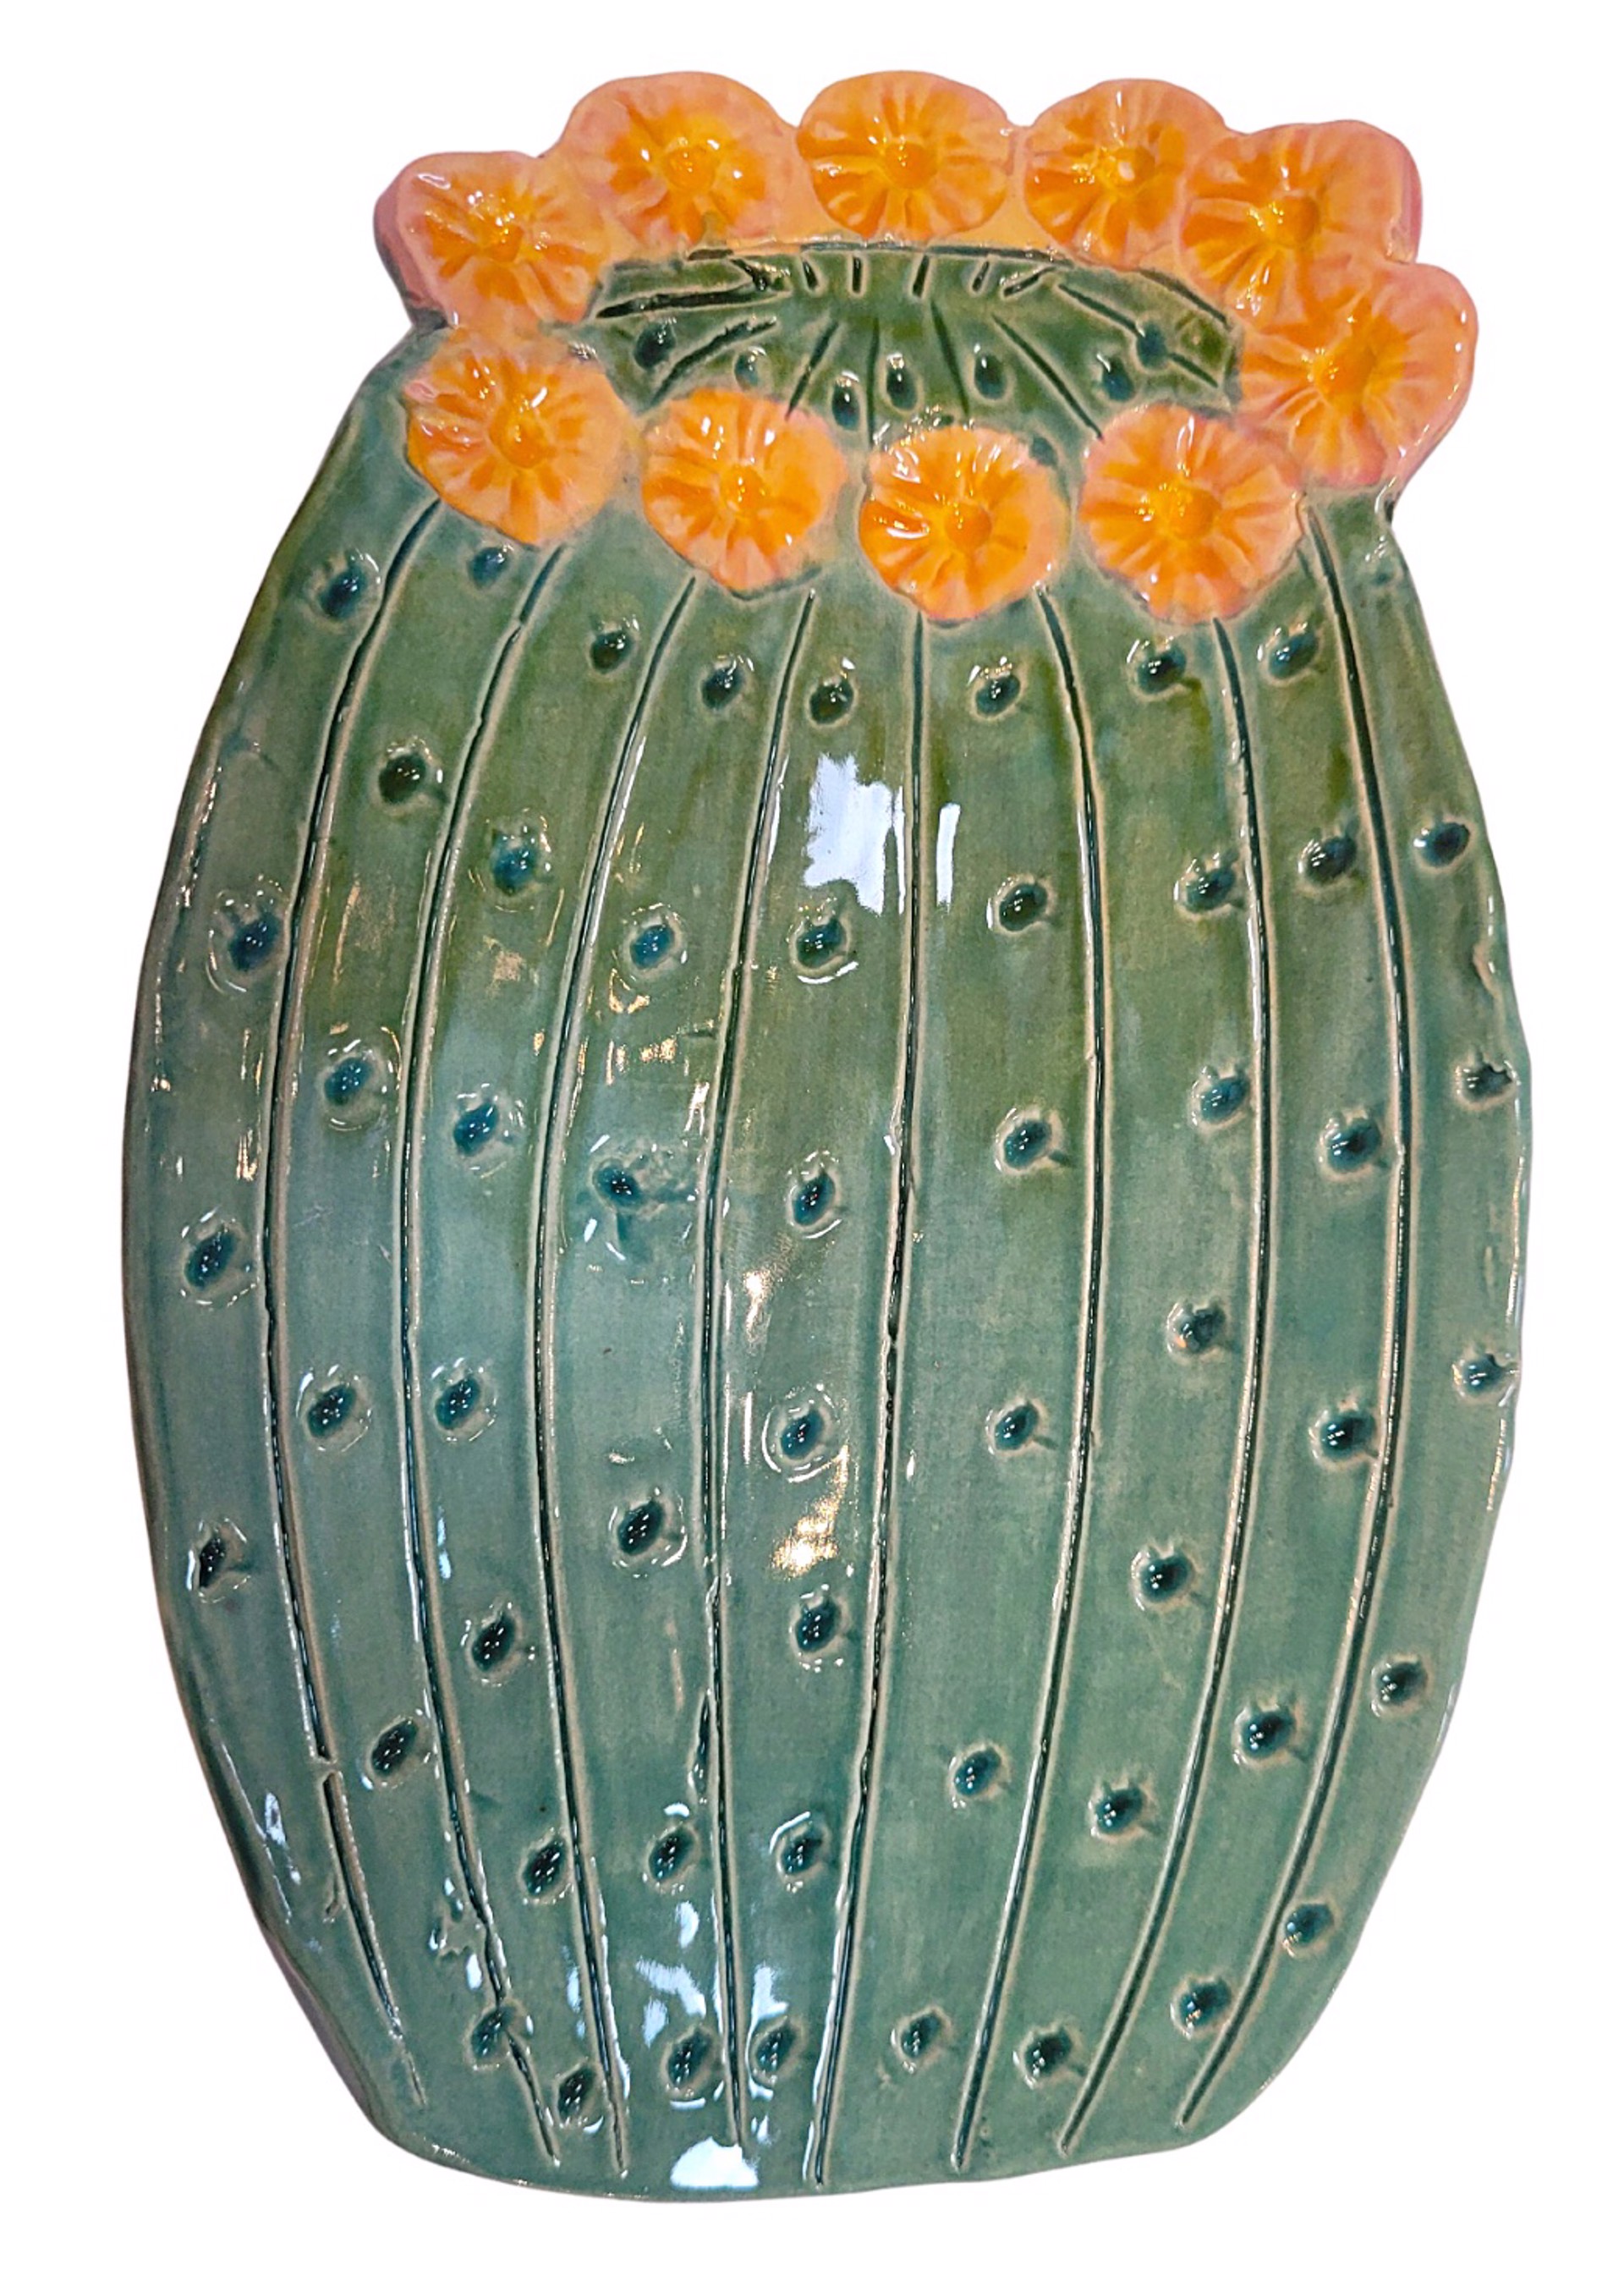 Long Barrel Cactus Spoon Rest-Yellow Flowers by Robin Chlad